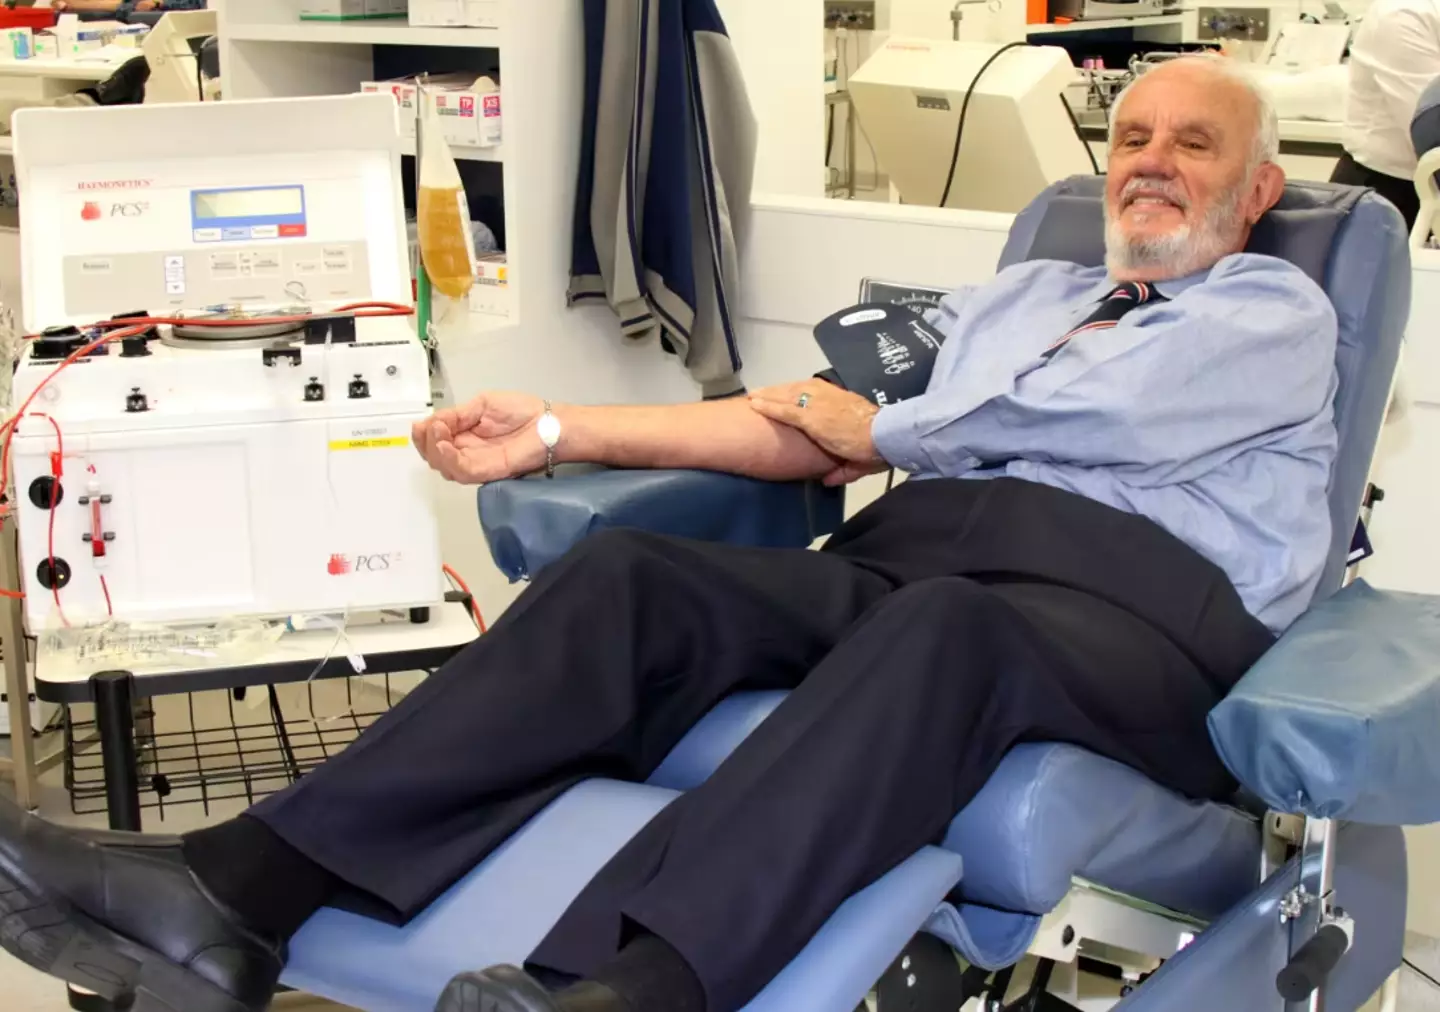 James Harrison donated blood for over 60 years.